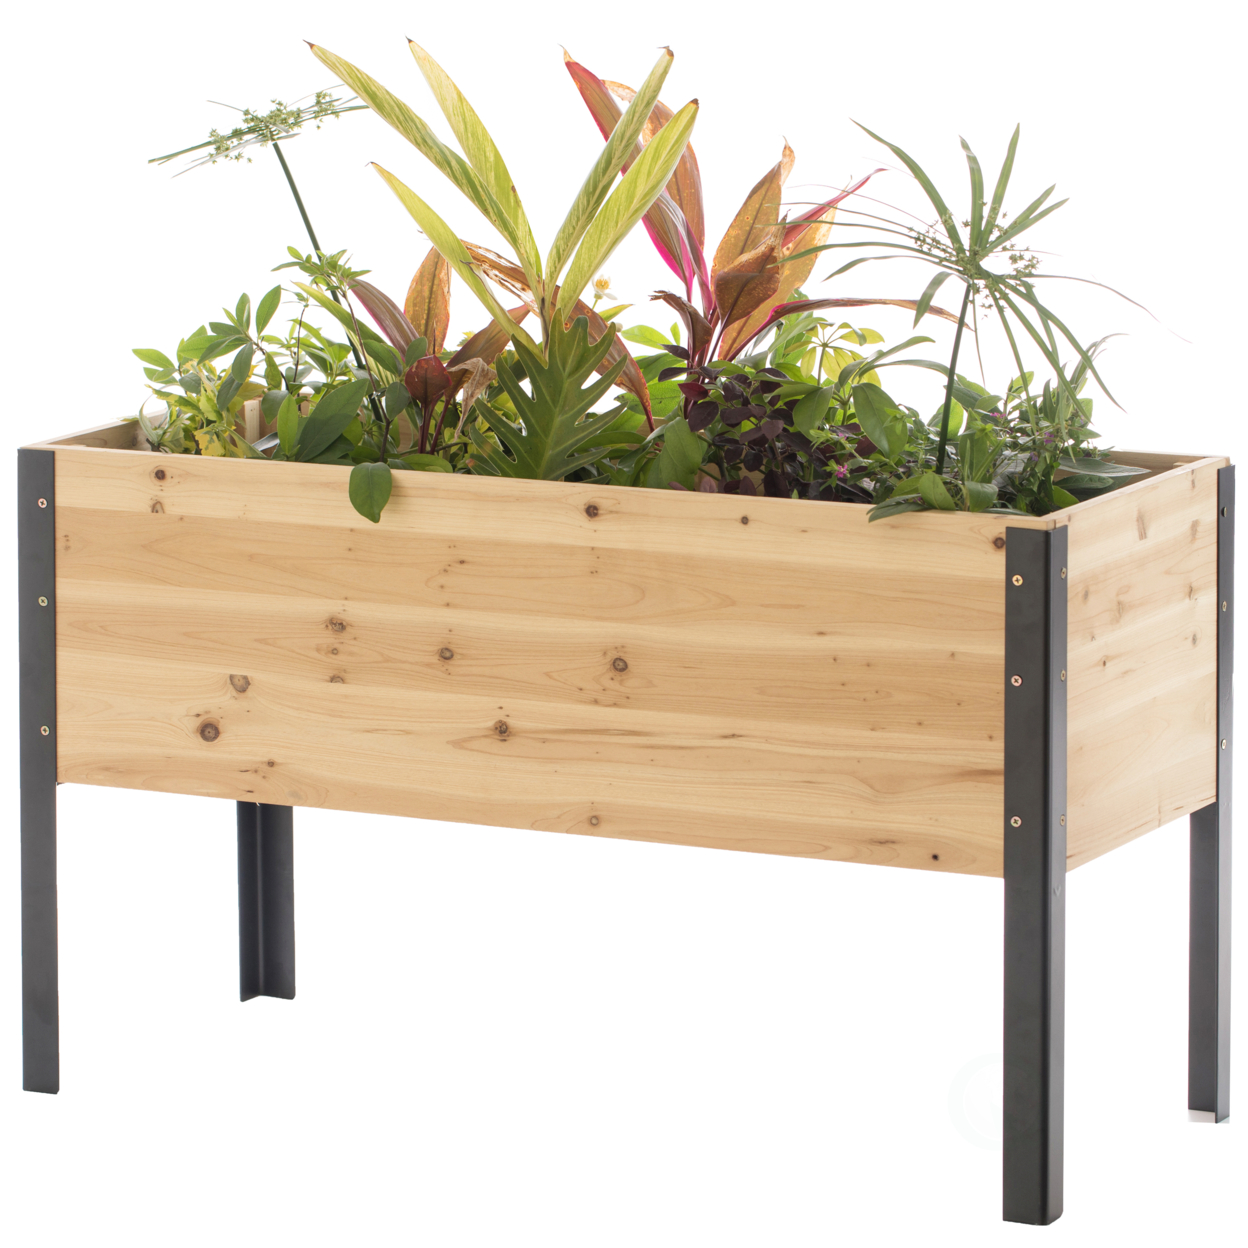 Elevated Outdoor Raised Rectangular Planter Bed Box Solid Wood with Steel Legs, Natural